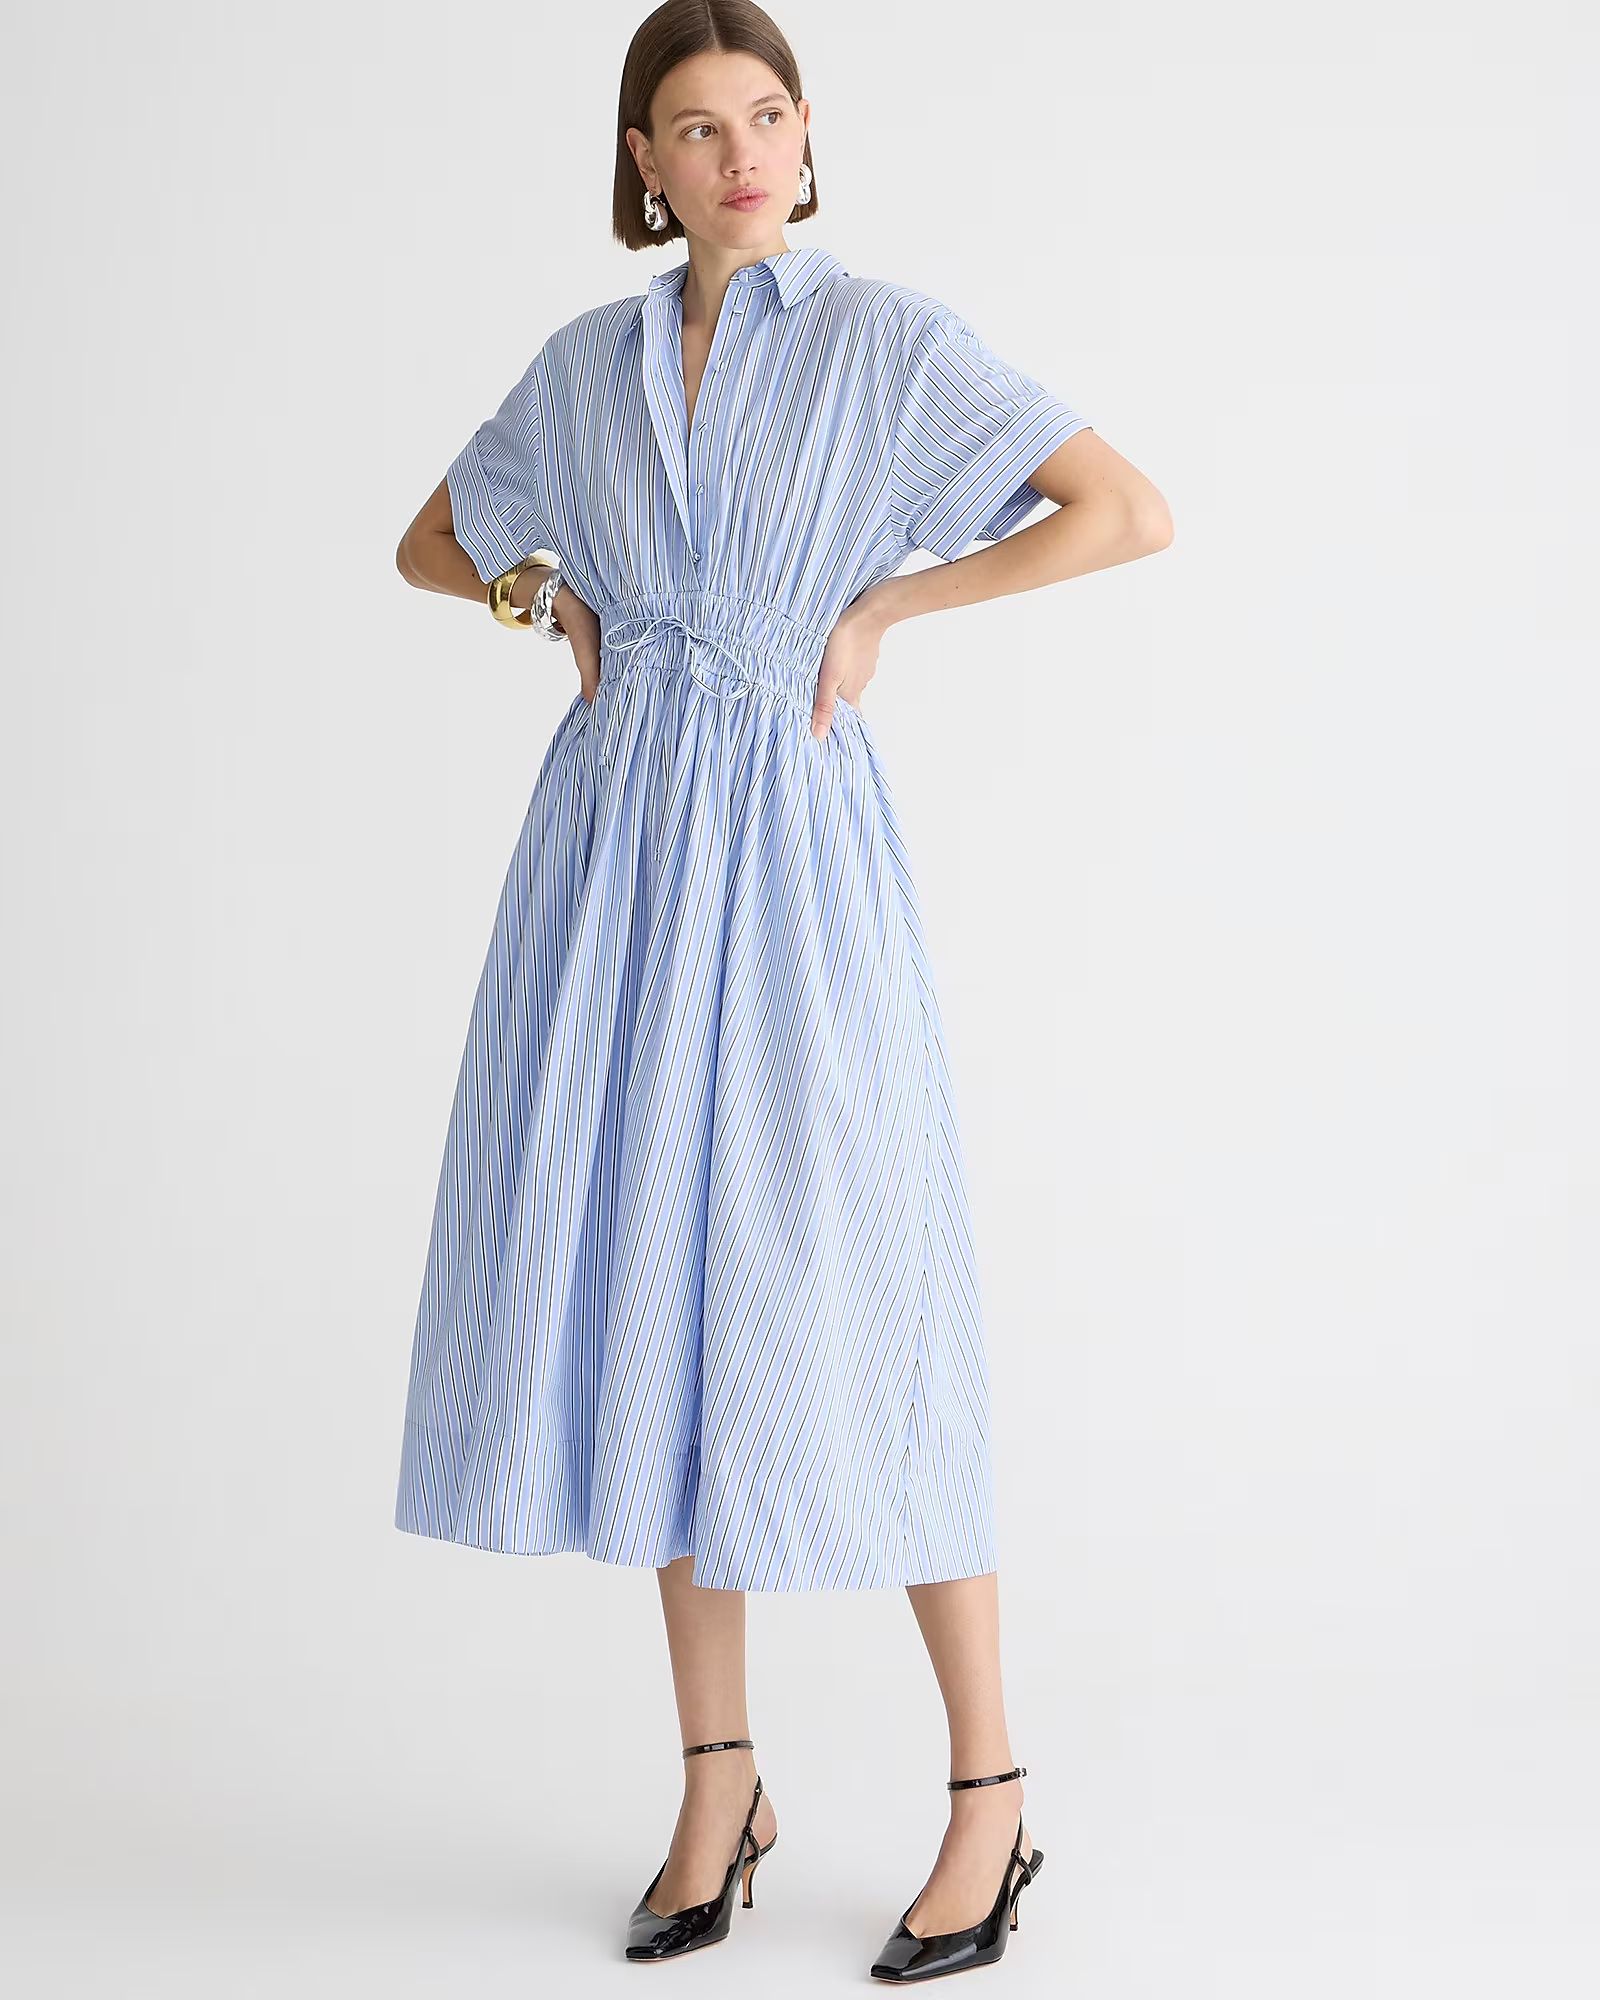 top rated4.6(95 REVIEWS)Elena shirtdress in striped cotton poplin$178.00Select Colors$104.50Dress... | J.Crew US